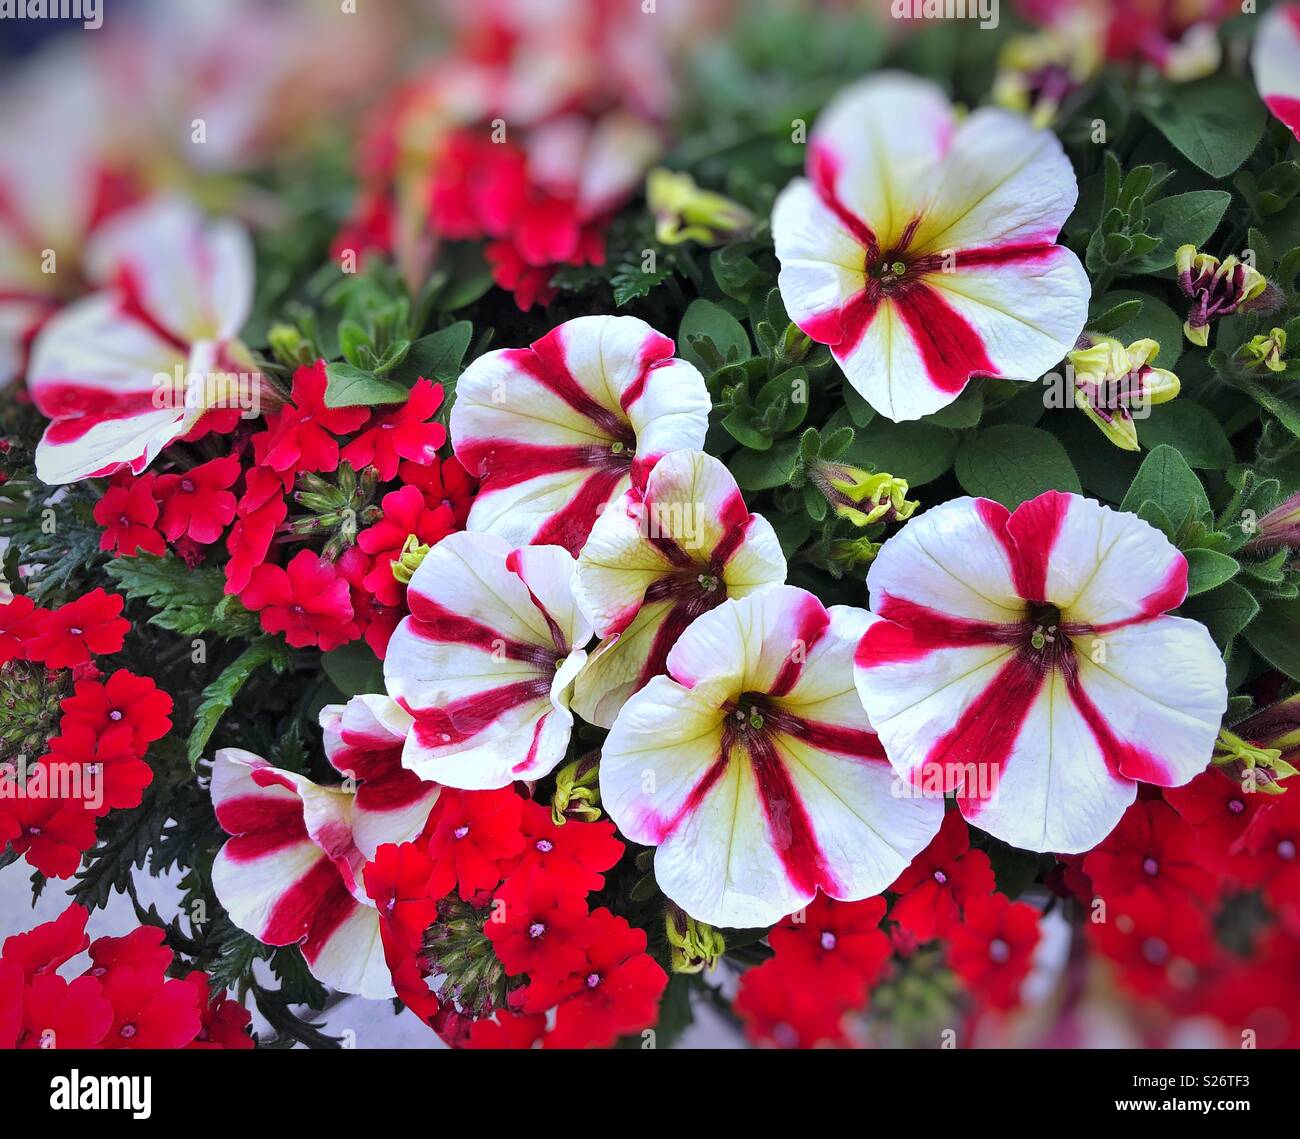 Red and white stripy petunia flowers Stock Photo